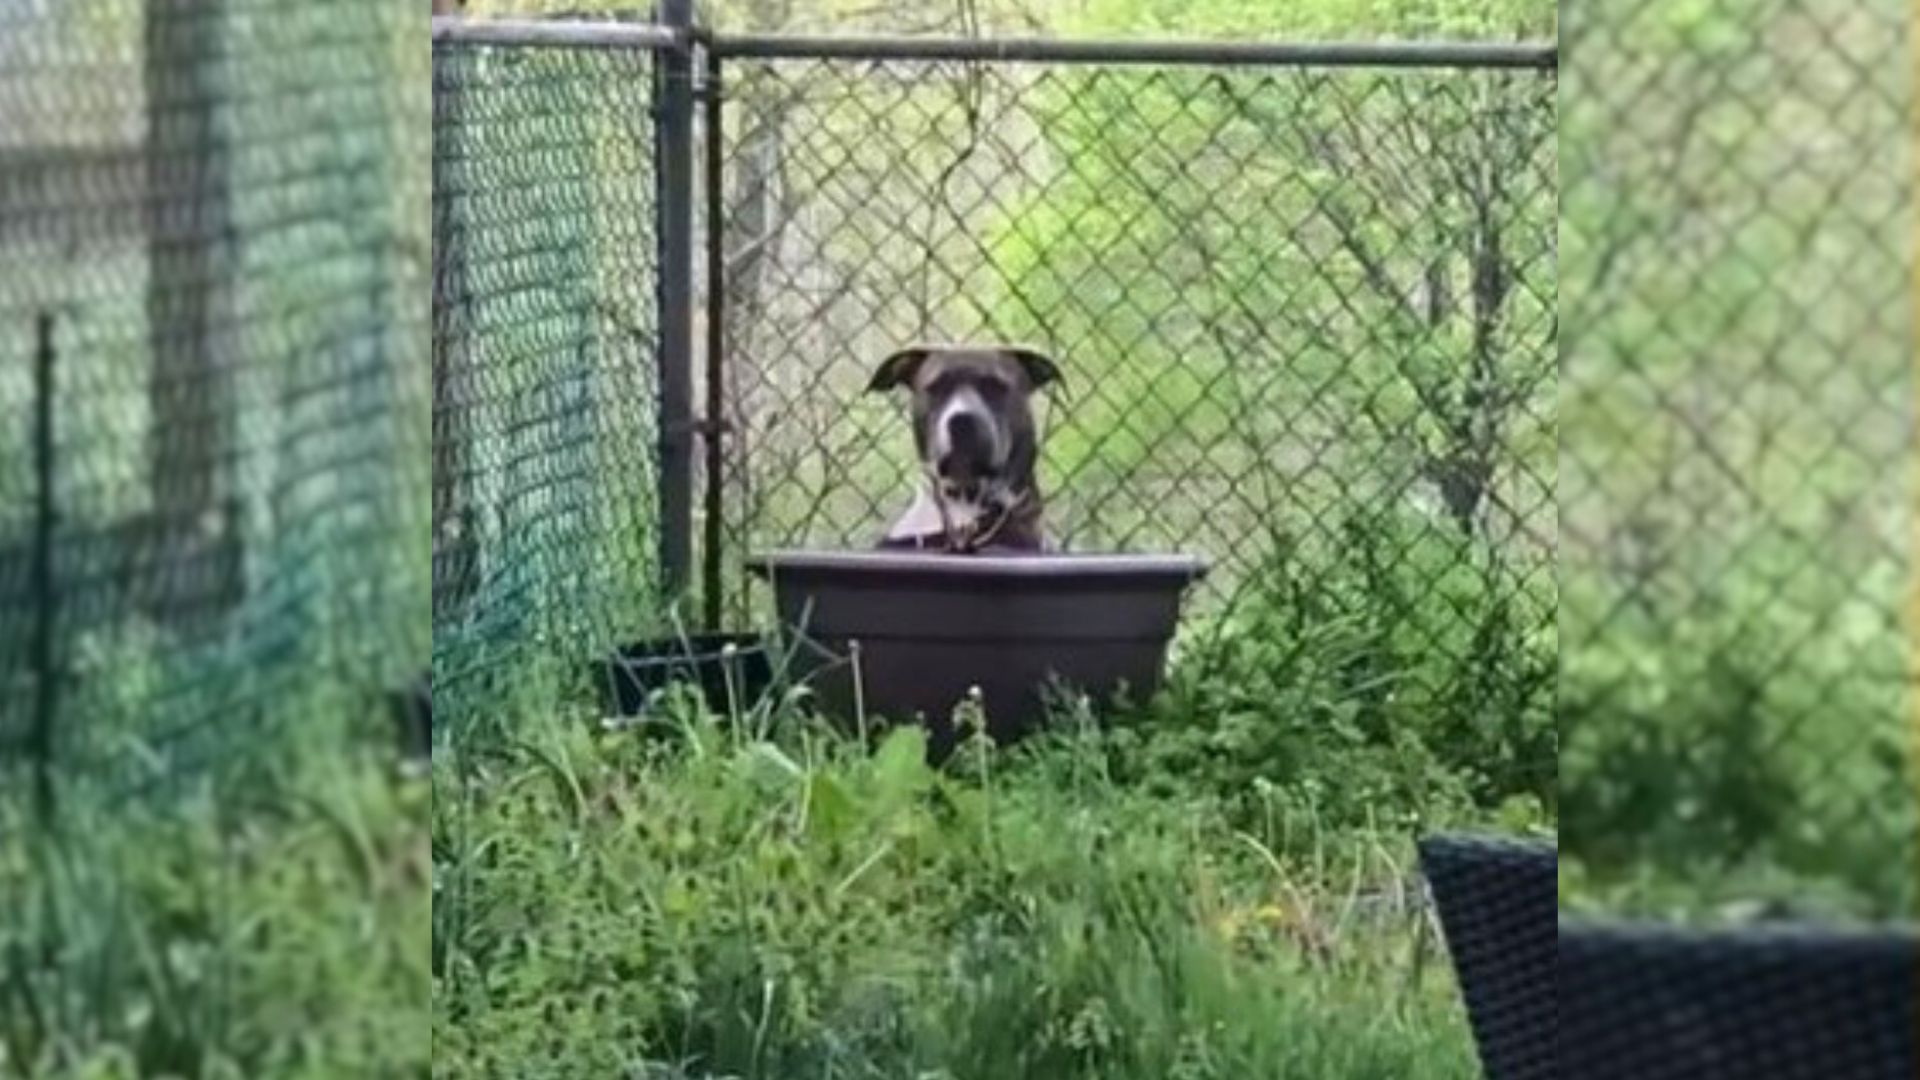 Scared Pittie Who Never Moved From Her Spot In The Yard Finally Shows Her Brighter Side